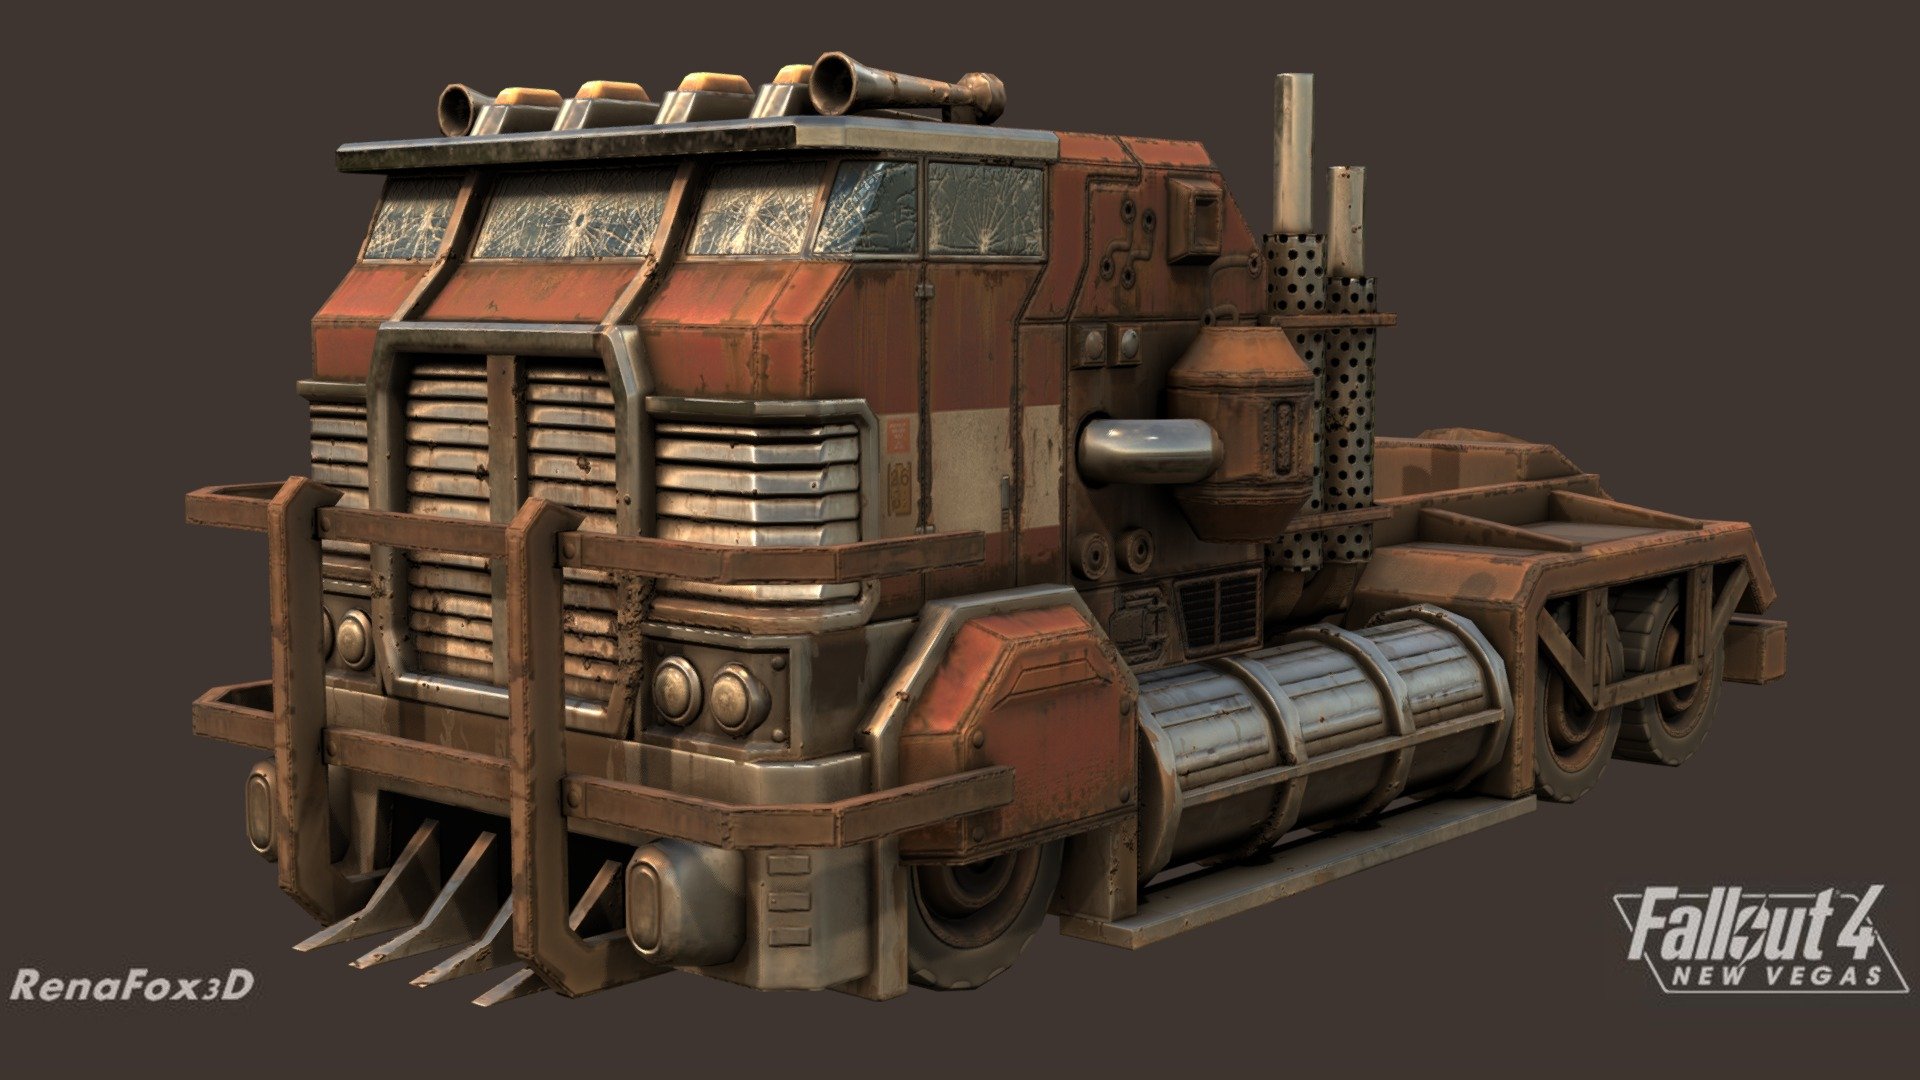 A heavy truck/tractor made for the up and coming &ldquo;Fallout 4: New Vegas